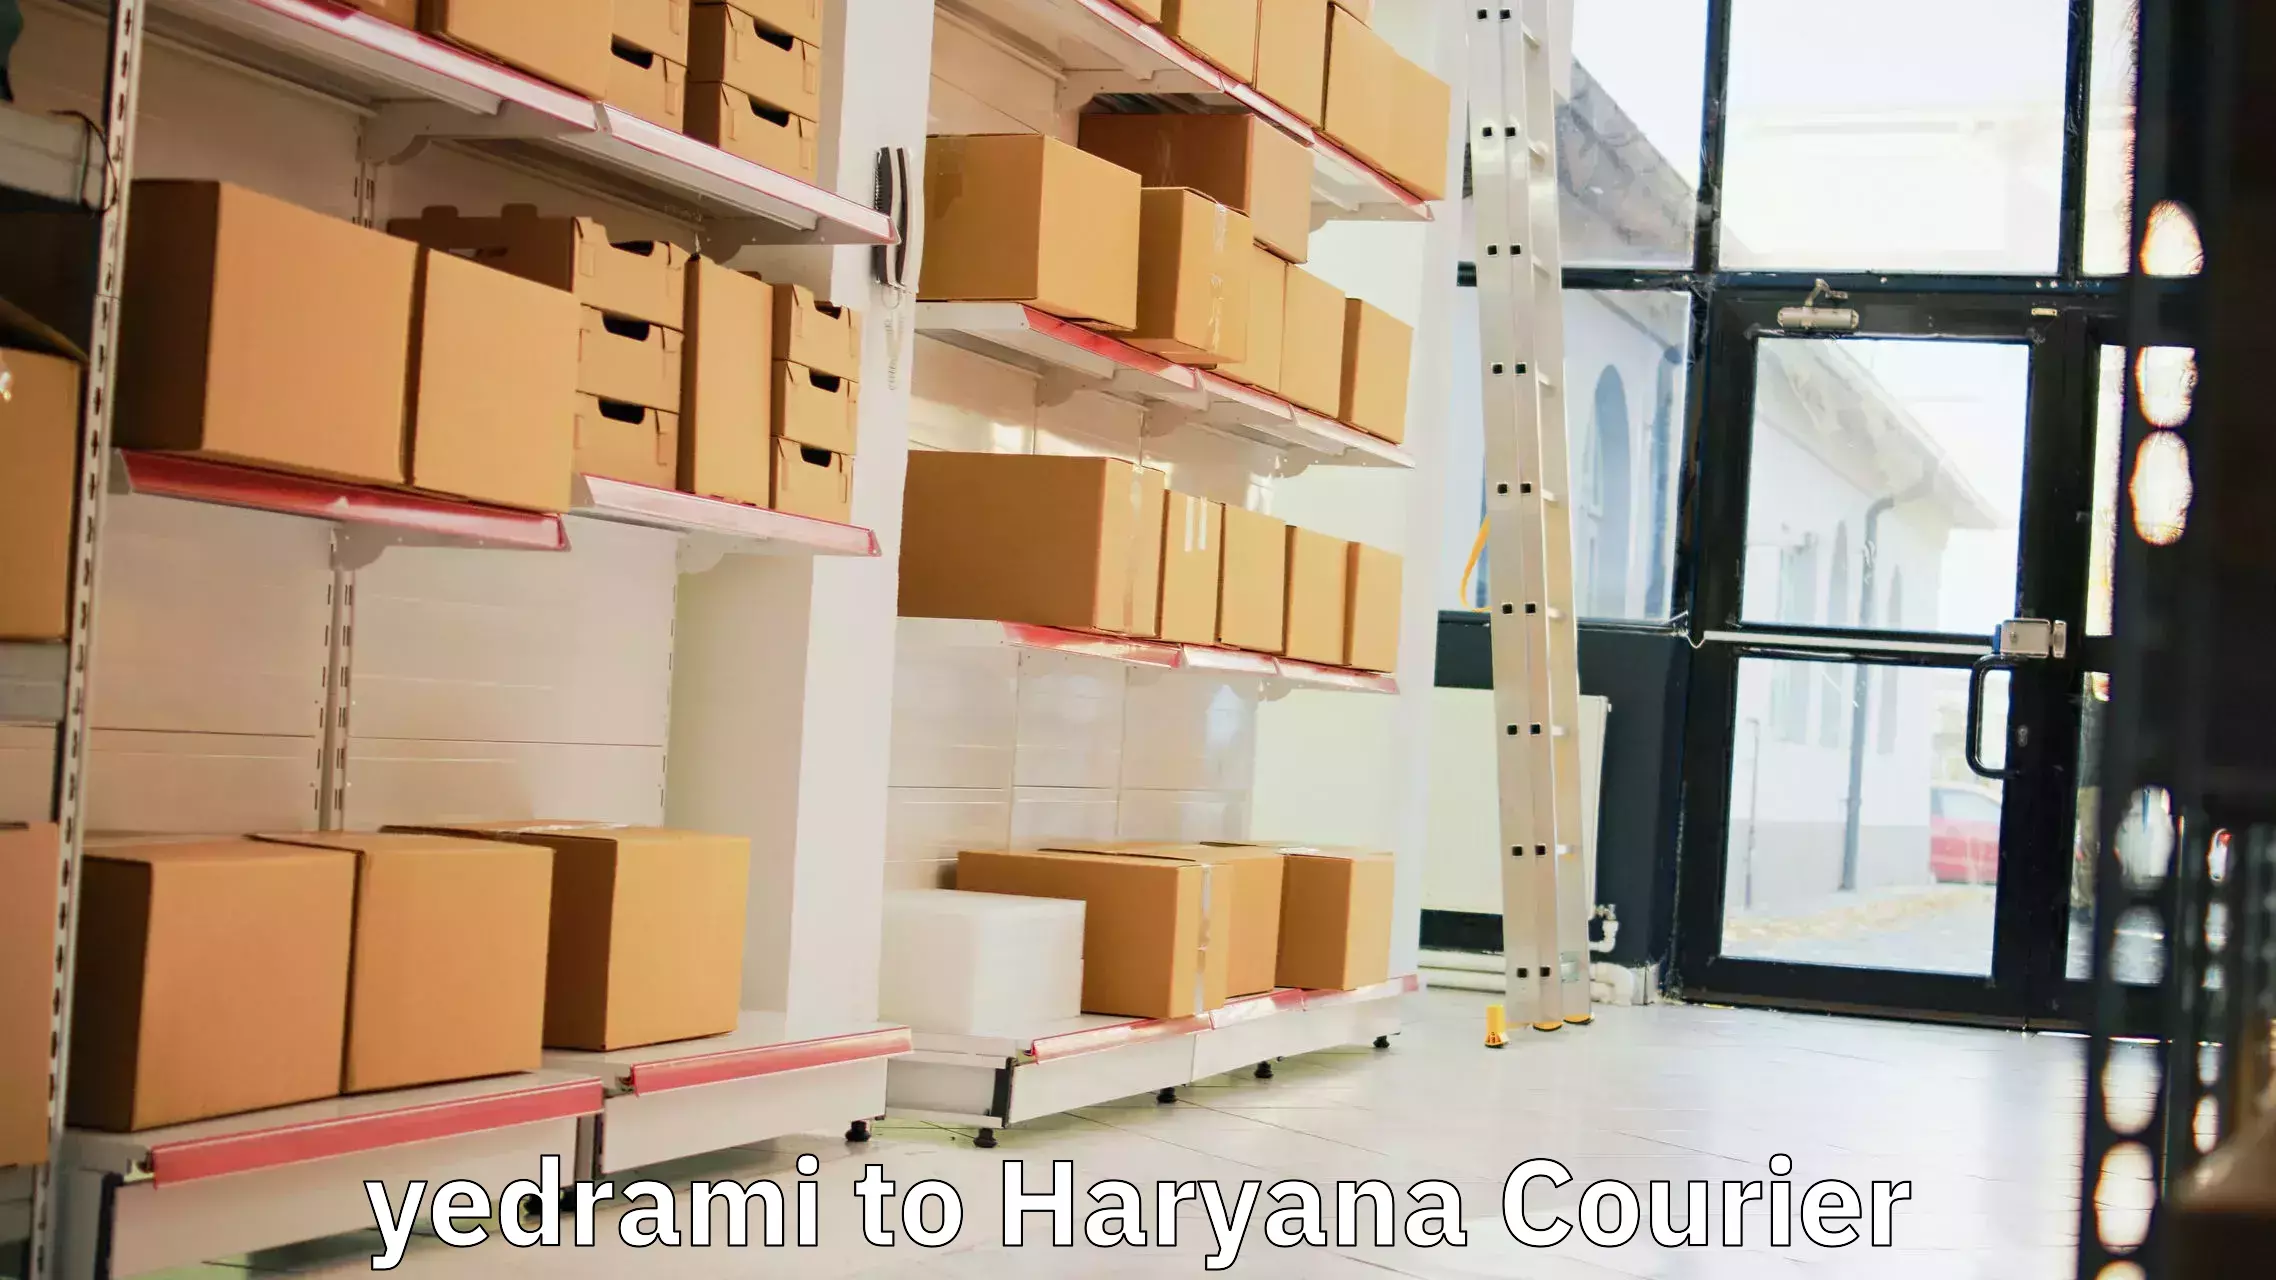 Professional parcel services yedrami to Haryana